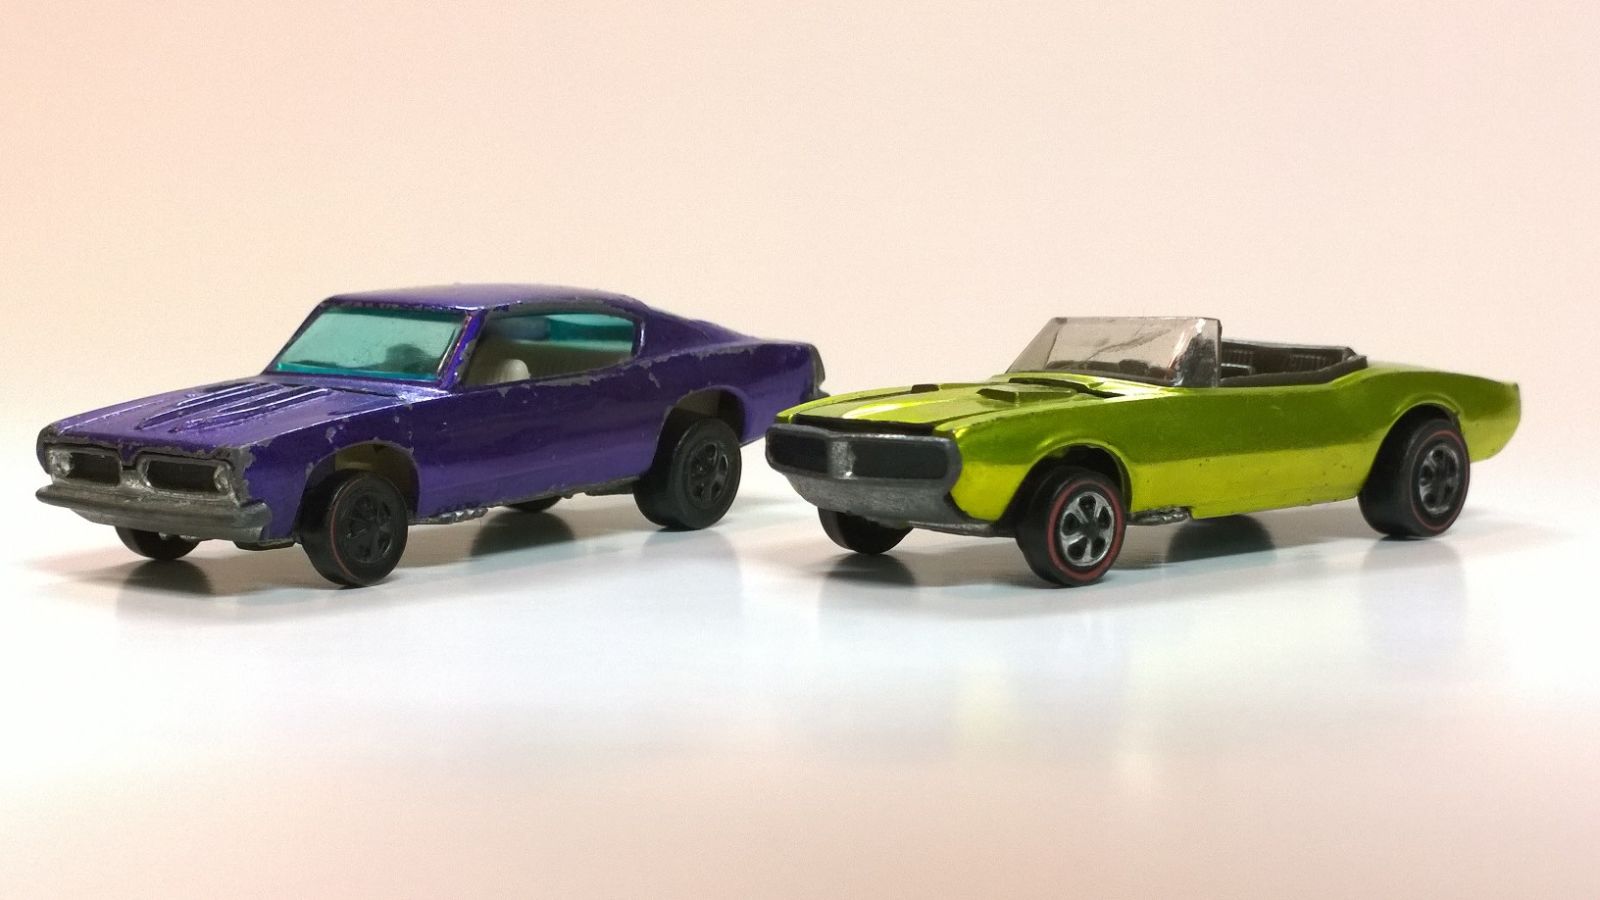 Illustration for article titled A bunch of random shots of random cars to test my light box...PHOTO DUMP!!